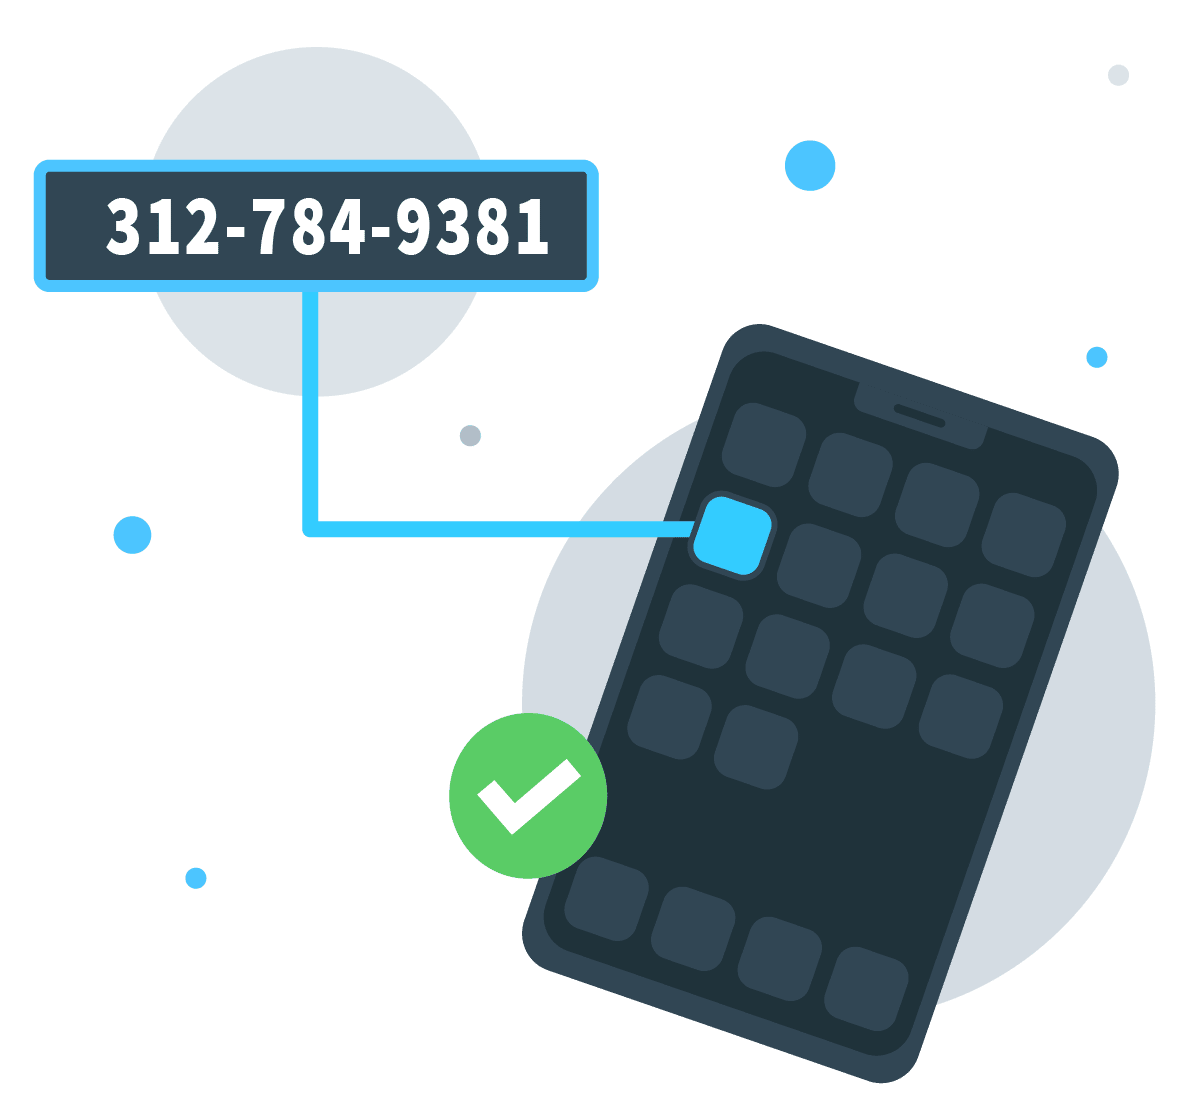 App That Gives You A Phone Number